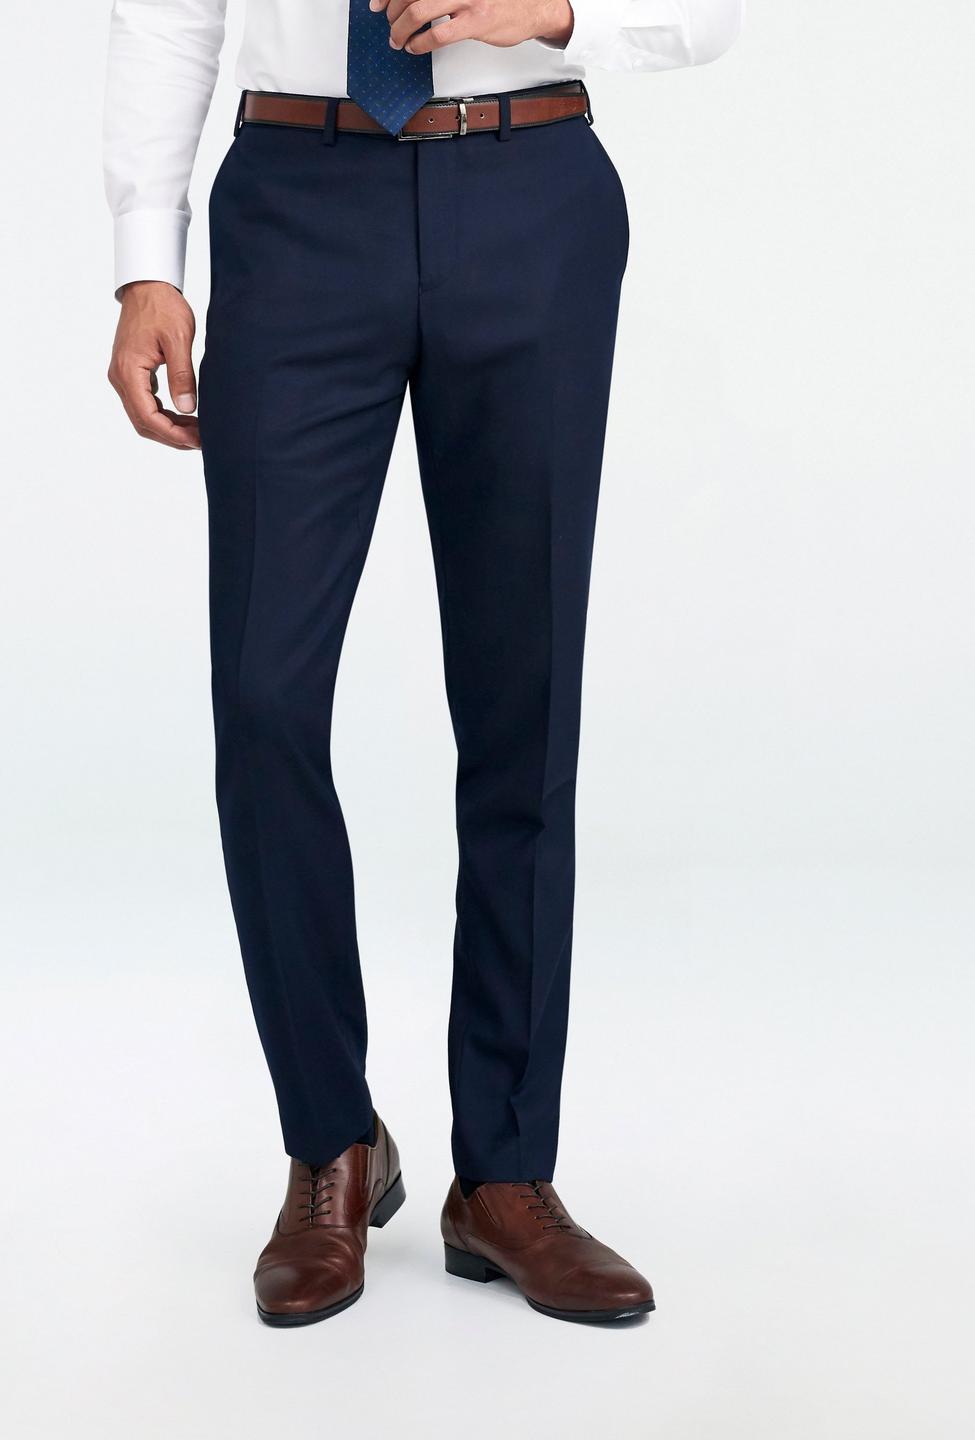 Navy pants - Hayward Solid Design from Luxury Indochino Collection